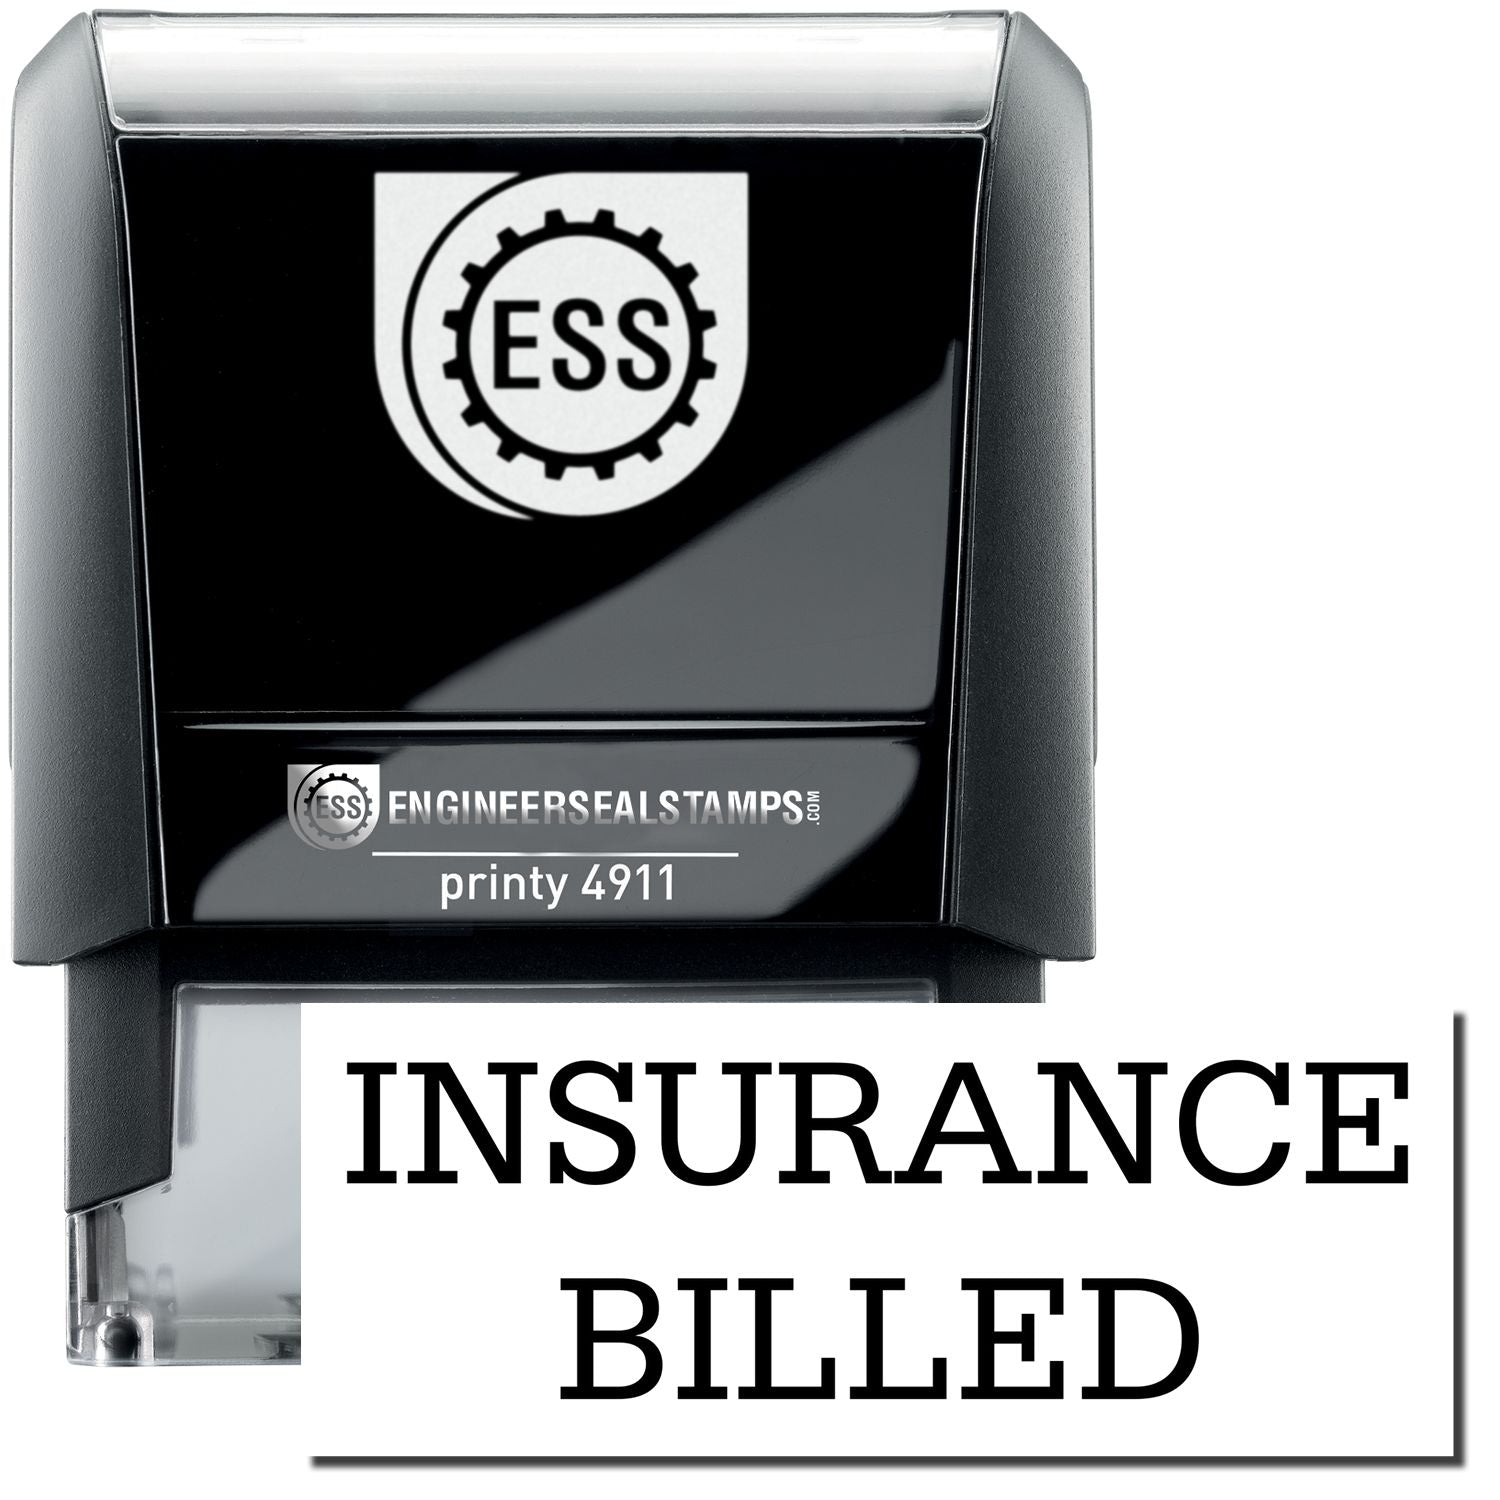 A self-inking stamp with a stamped image showing how the text "INSURANCE BILLED" is displayed after stamping.